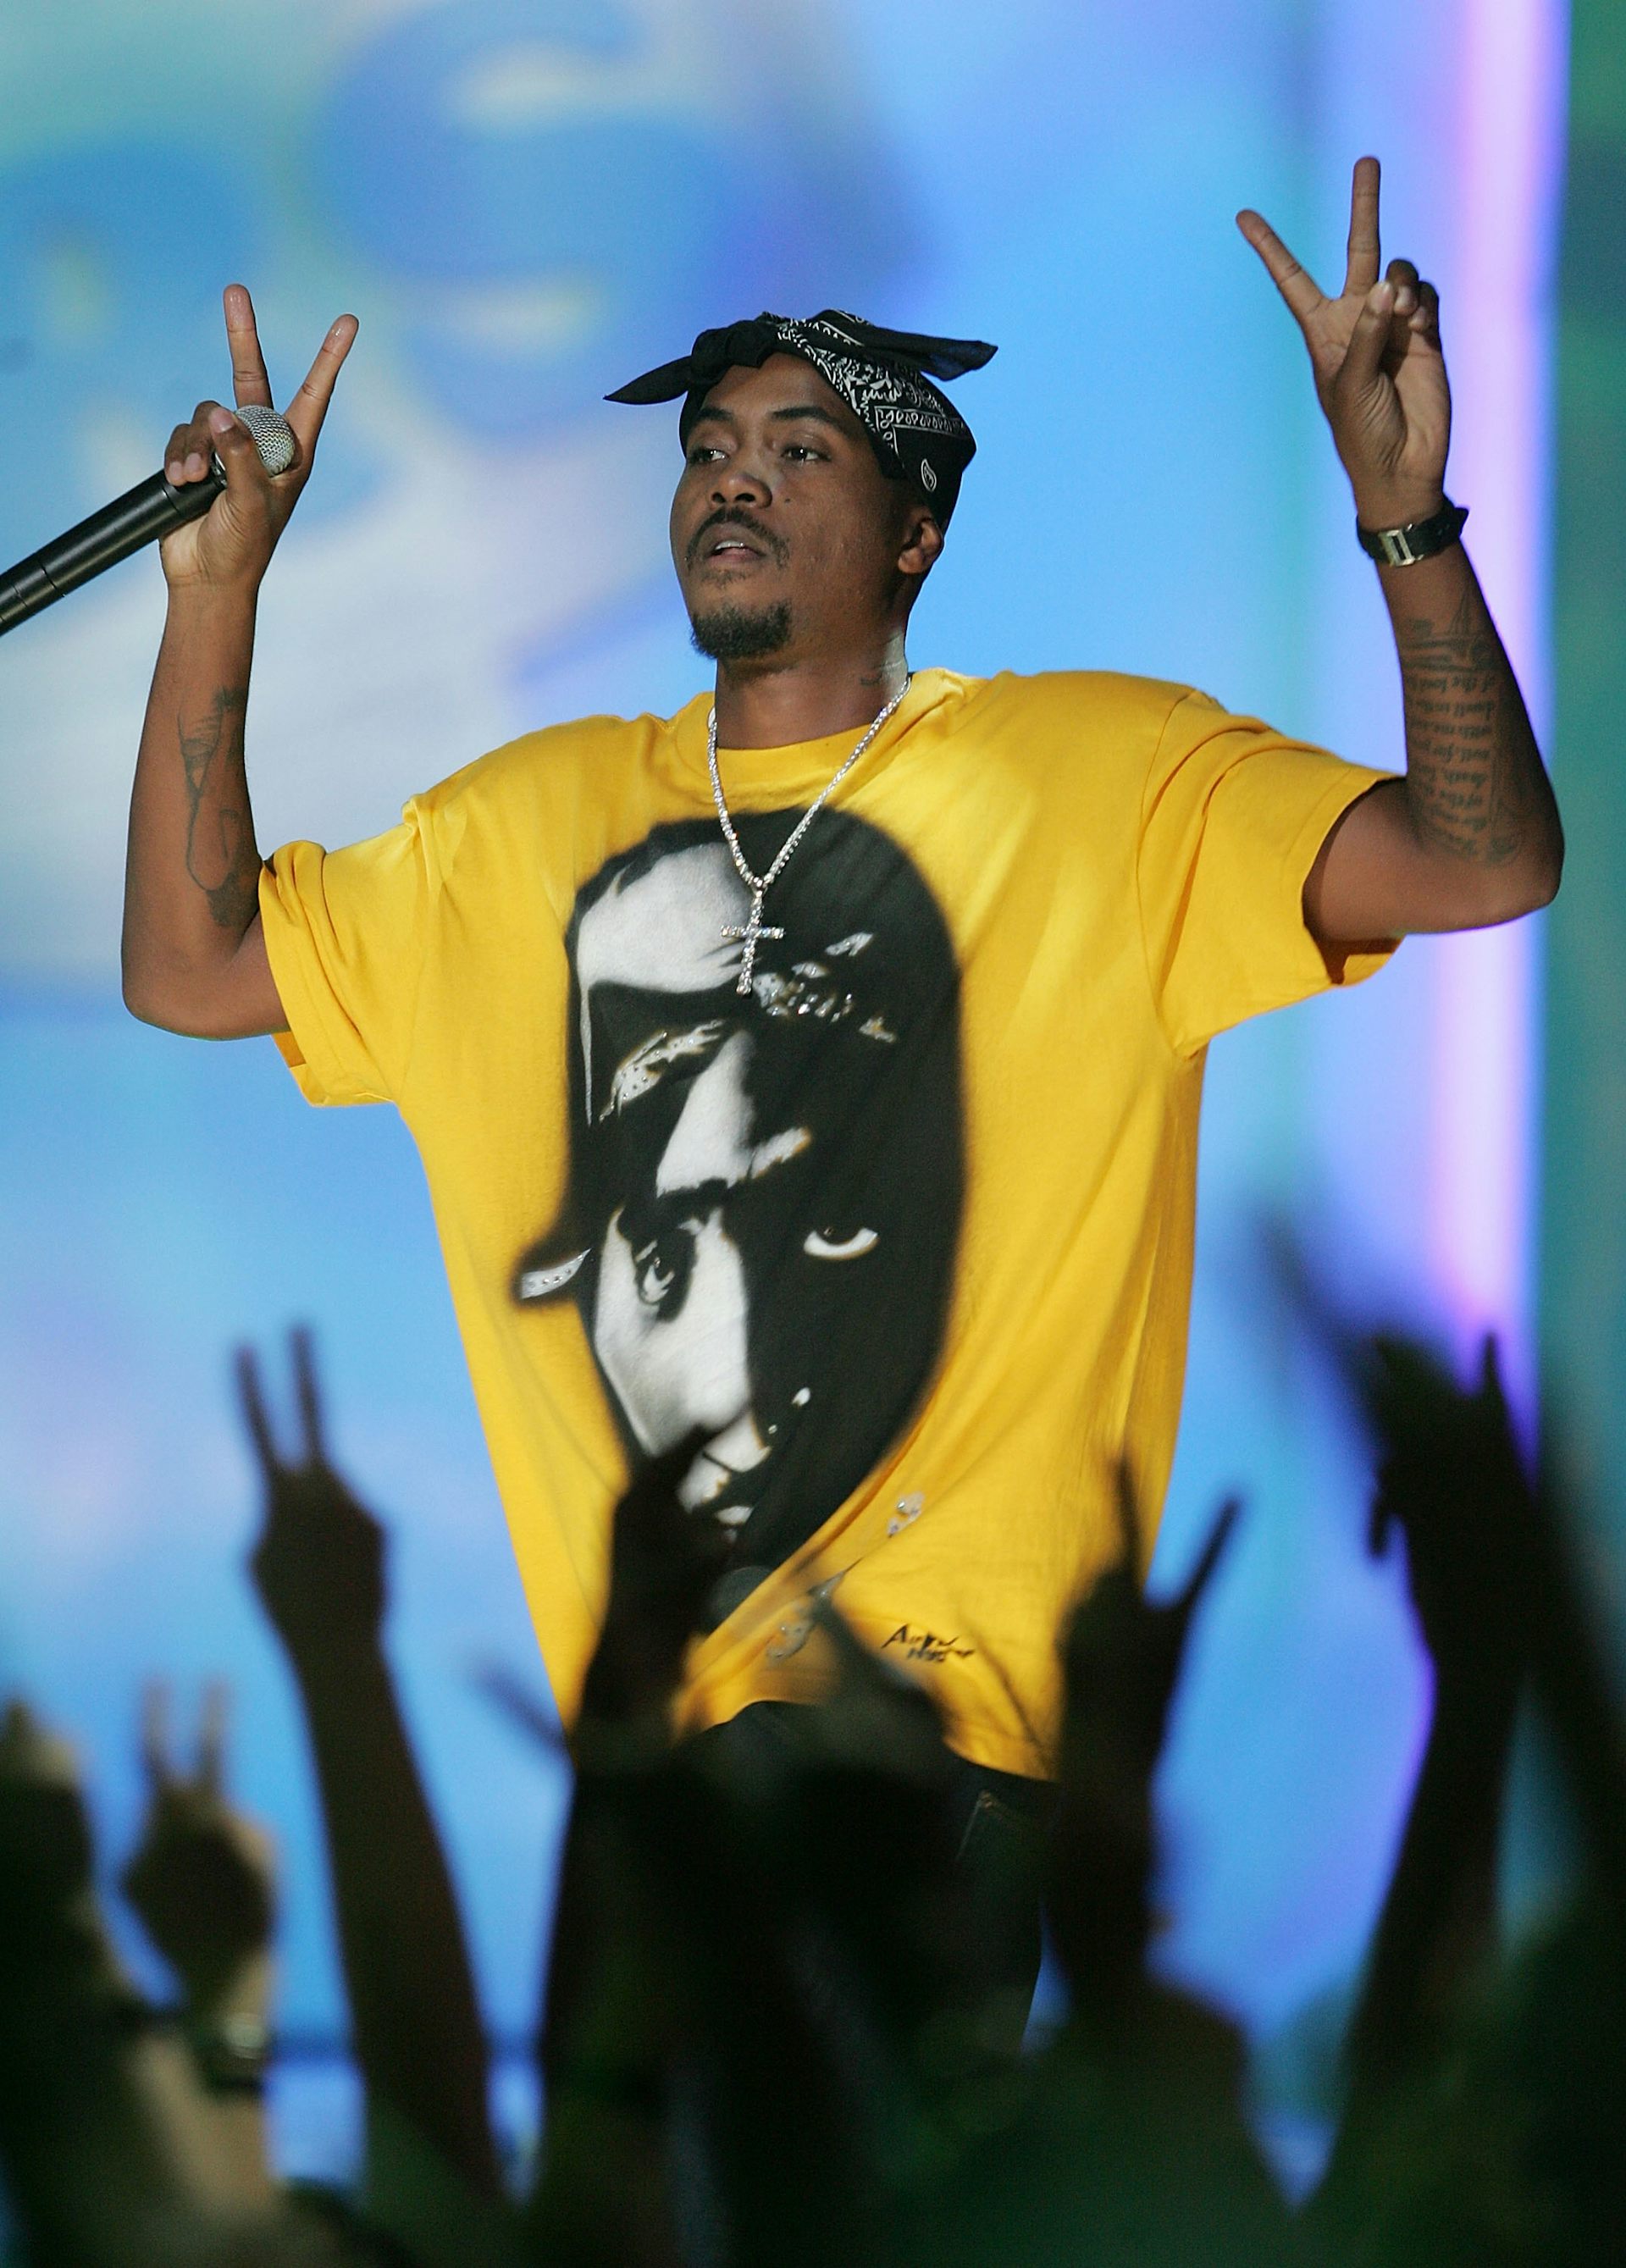 A man on stage raises both hands in peace signs as a crowd of arms from spectators do the same. He wears a yellow T-shirt with a prominent image of a man on it.